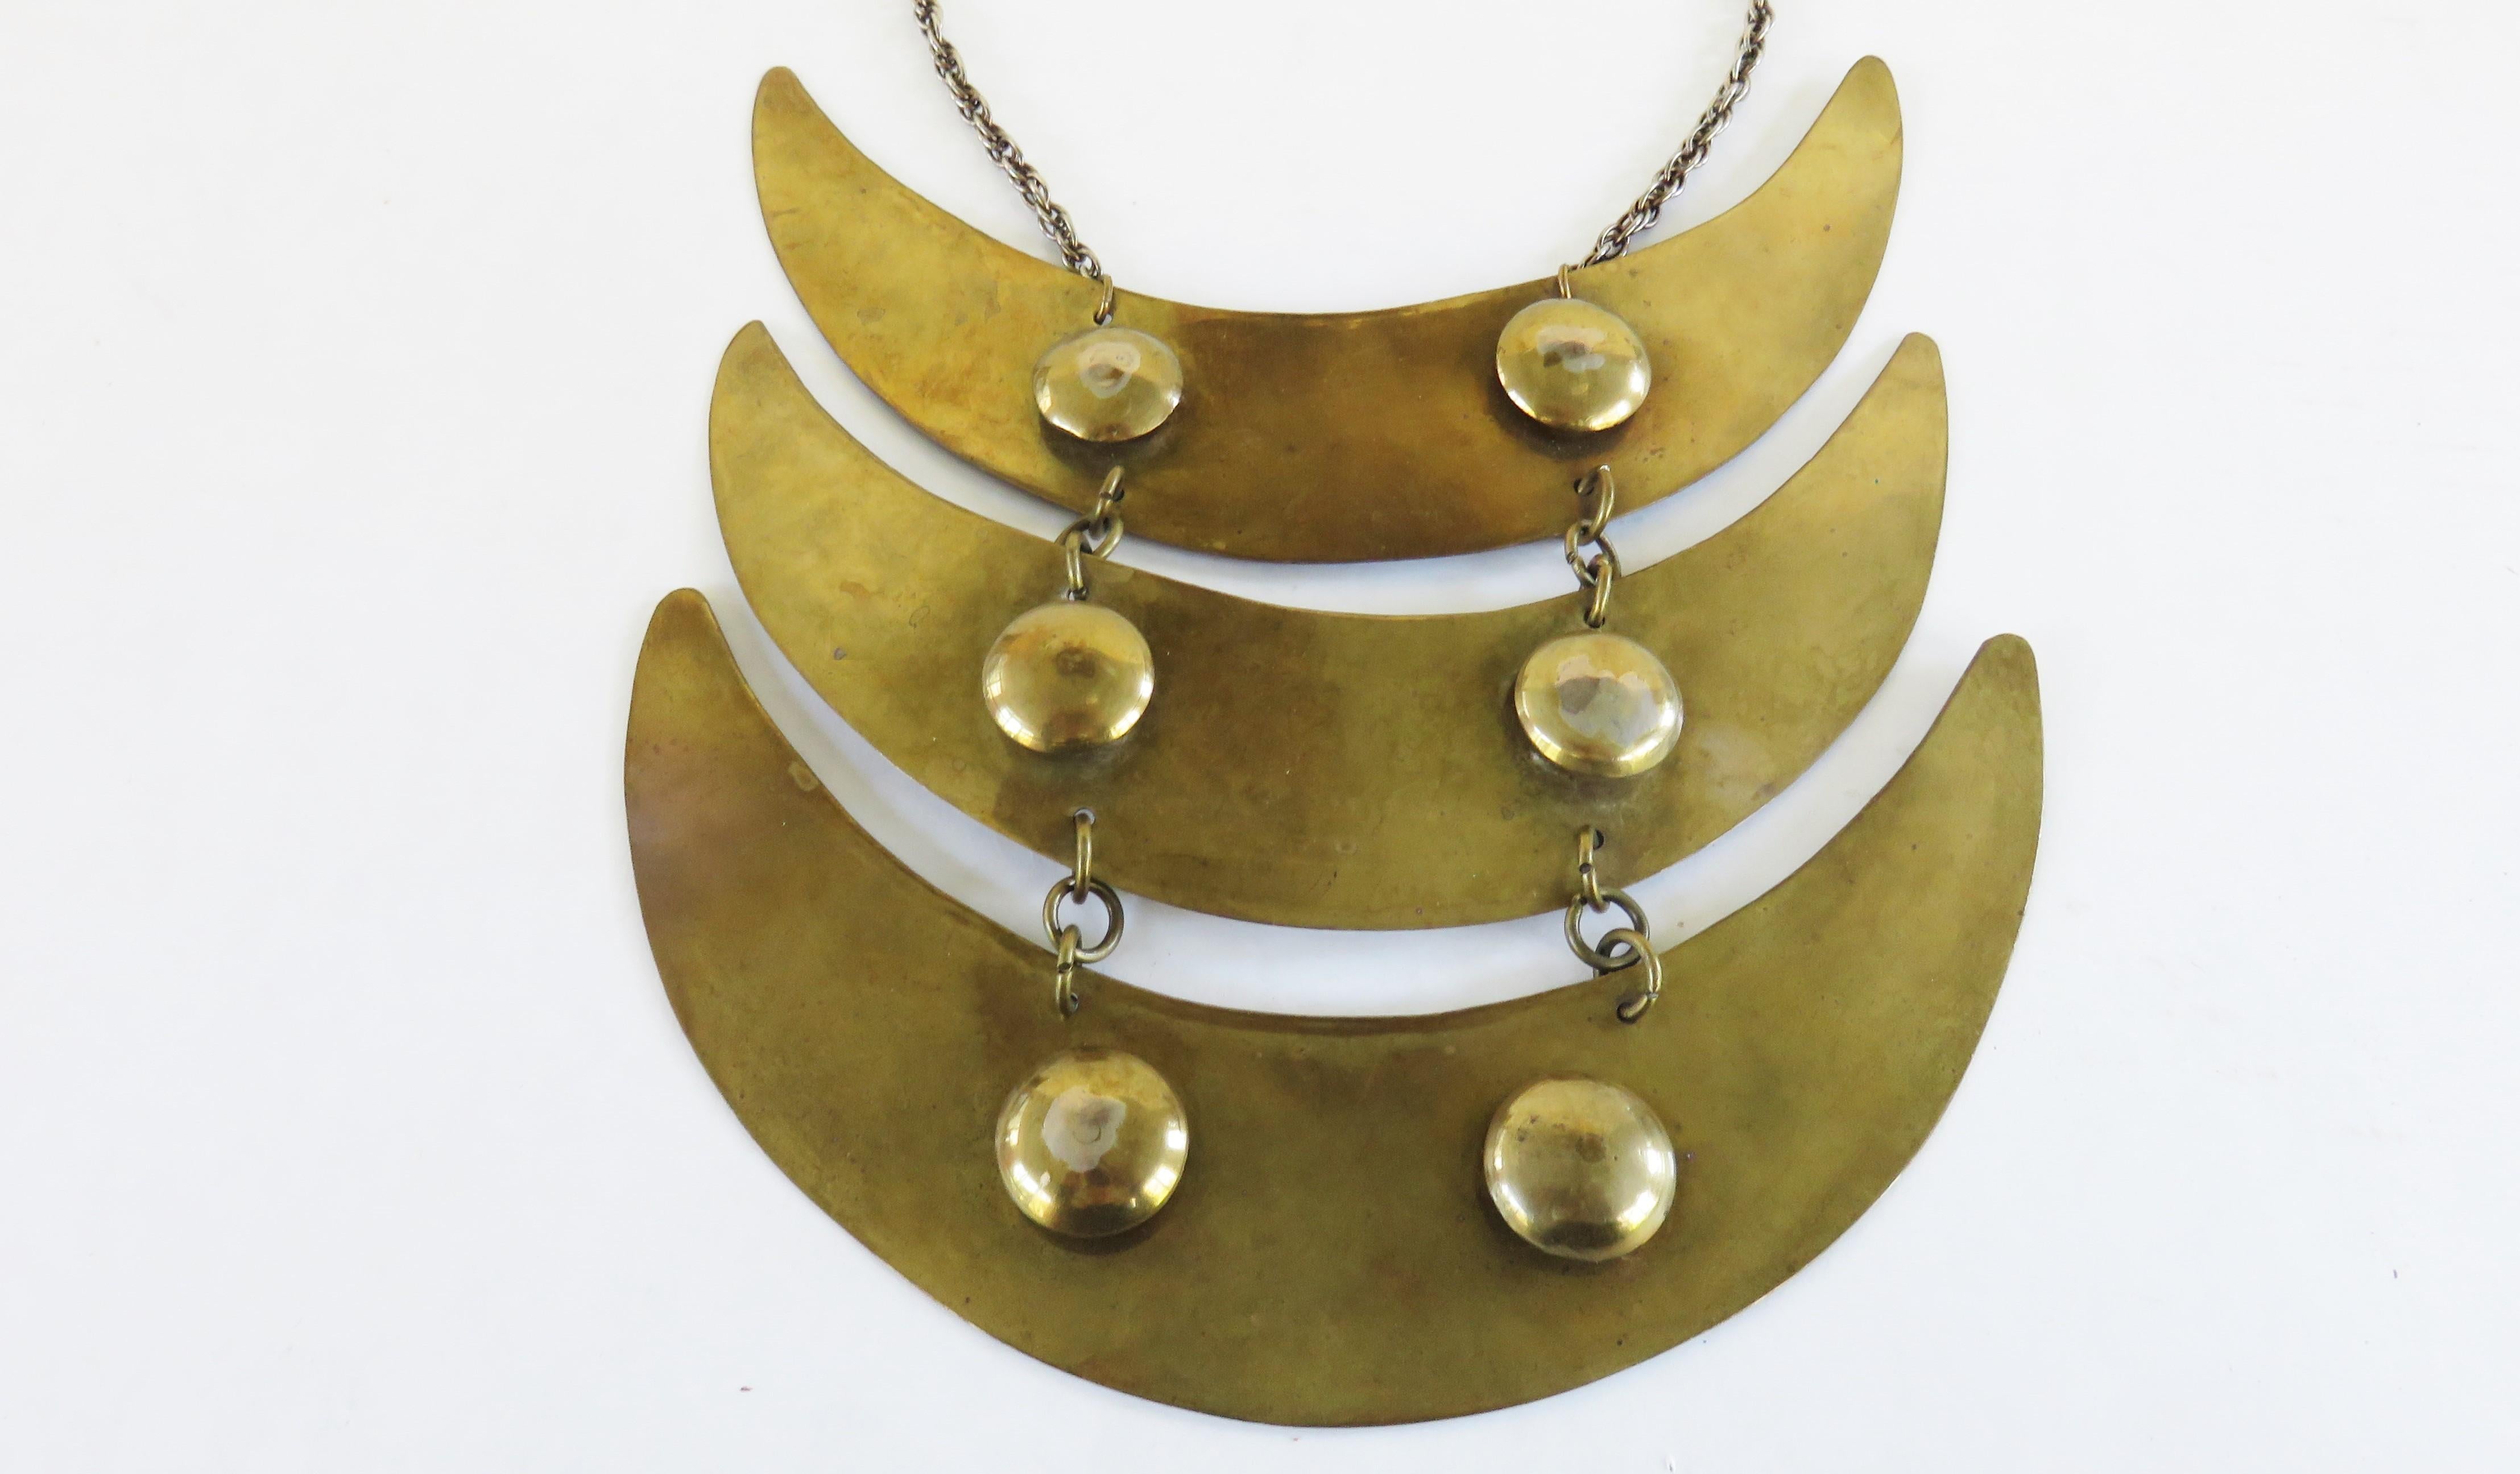 A fabulous golden brass choker collar with three crescent drops from a chain neck with a spring closure.  The crescents are joined with chains and there are 2  1